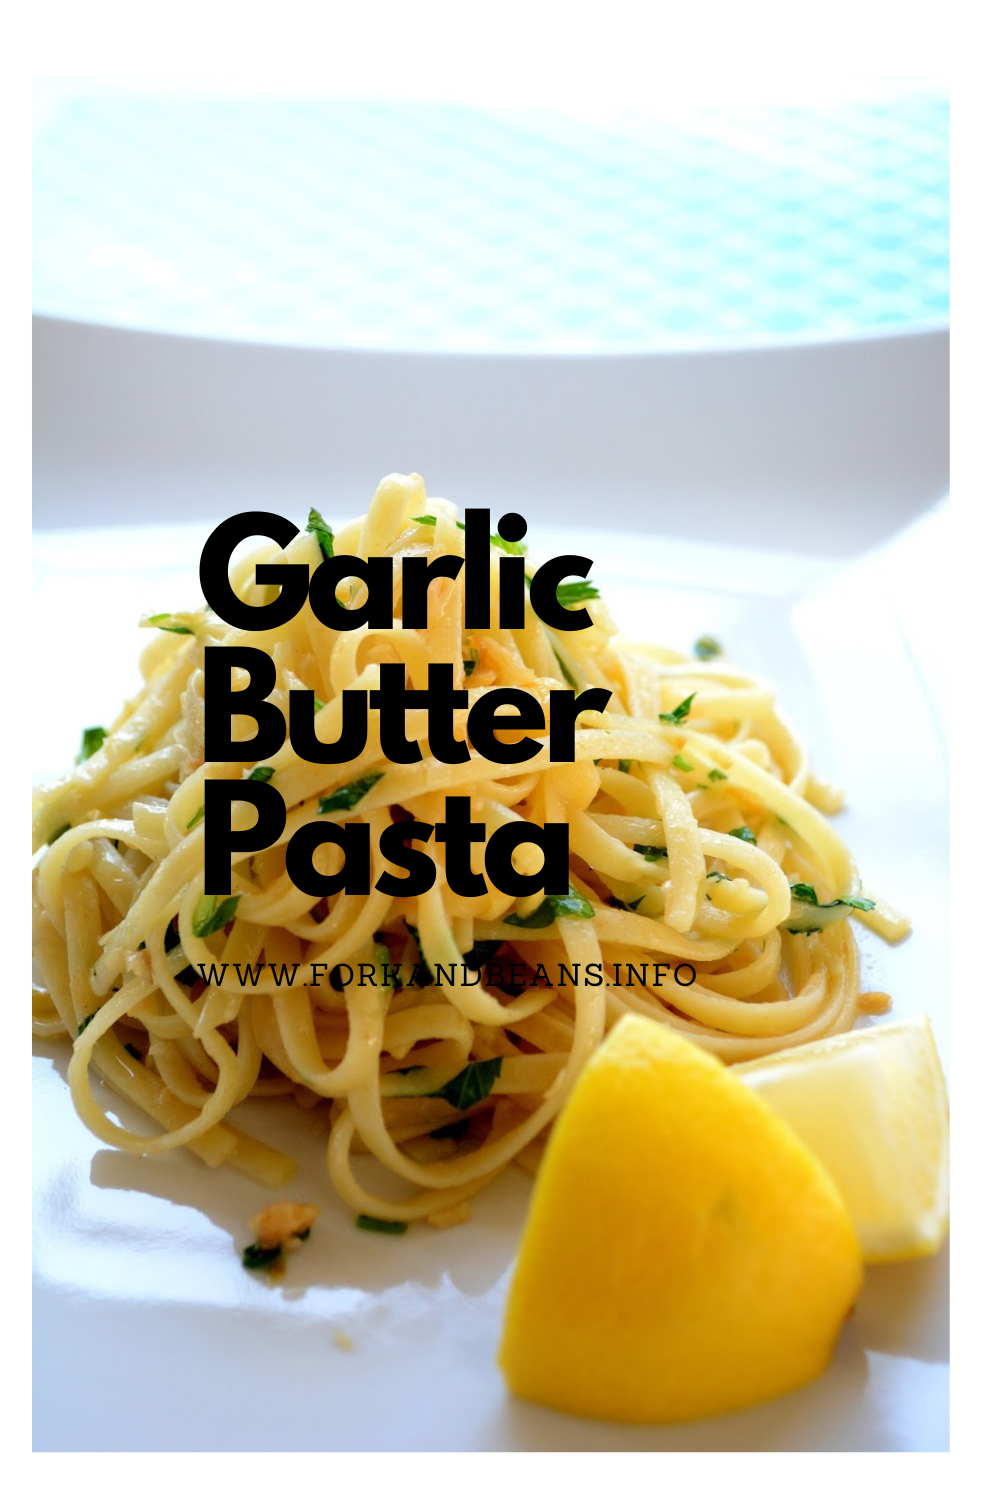 PASTA WITH GARLIC BUTTER